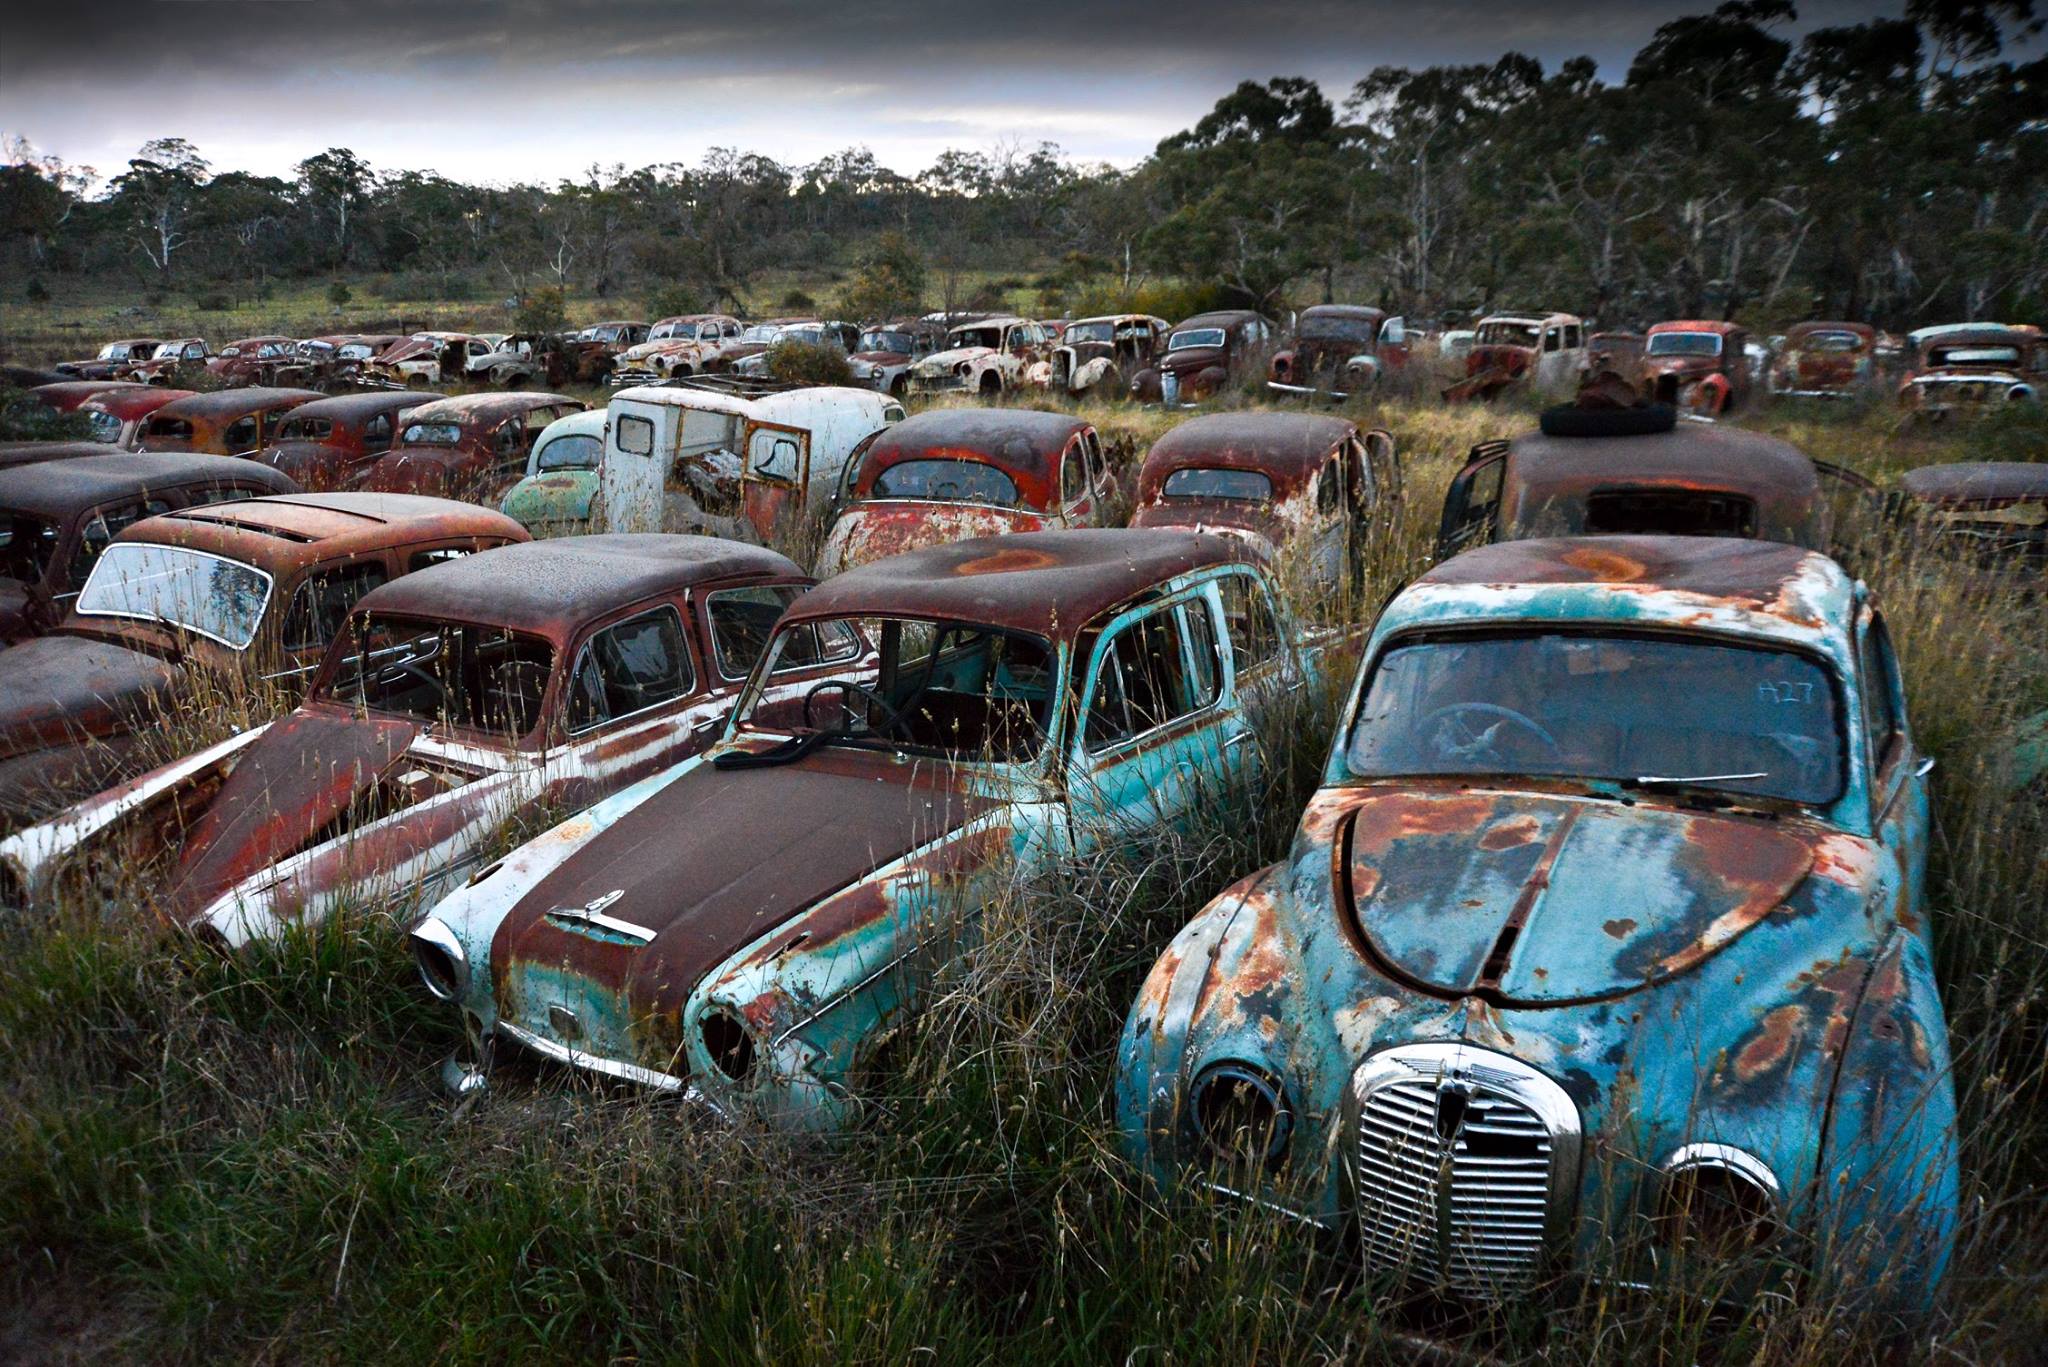 Started by accident, the largest car yard in the Southern Hemisphere is up for sale